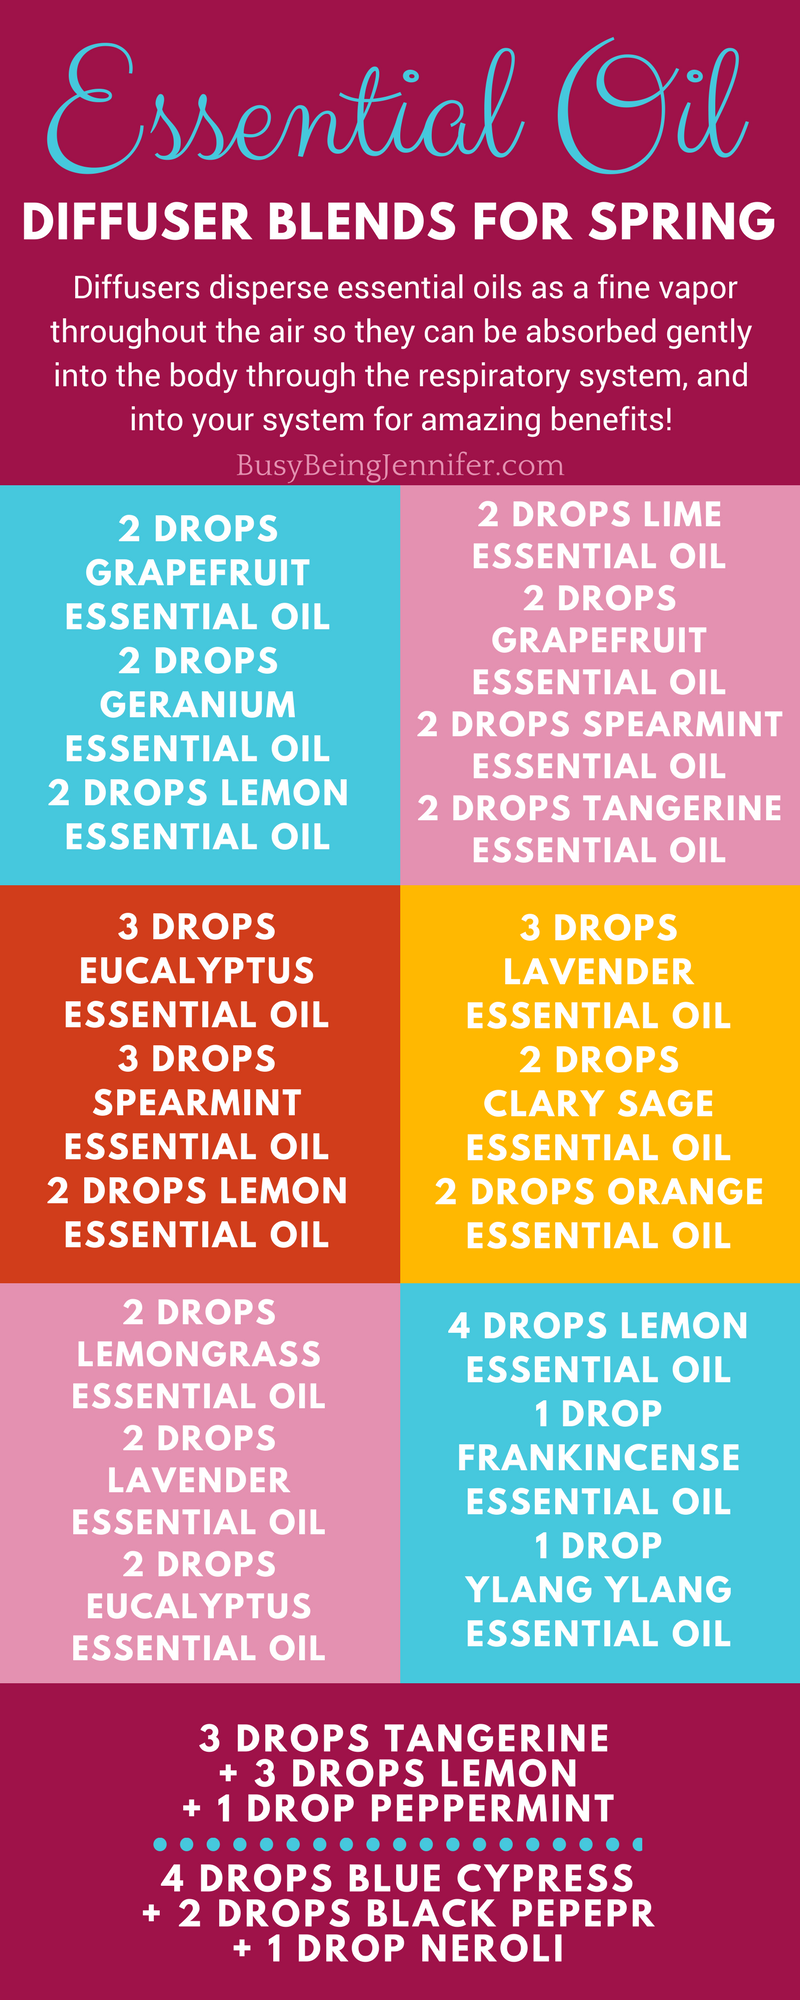 With the birds chirping, the sun shining and cleaning happening, its time to switch up my essential oil blends for spring! With the diffuser misting away, and my house smelling amazing, I find I am far more excited to tackle my daily to do list!